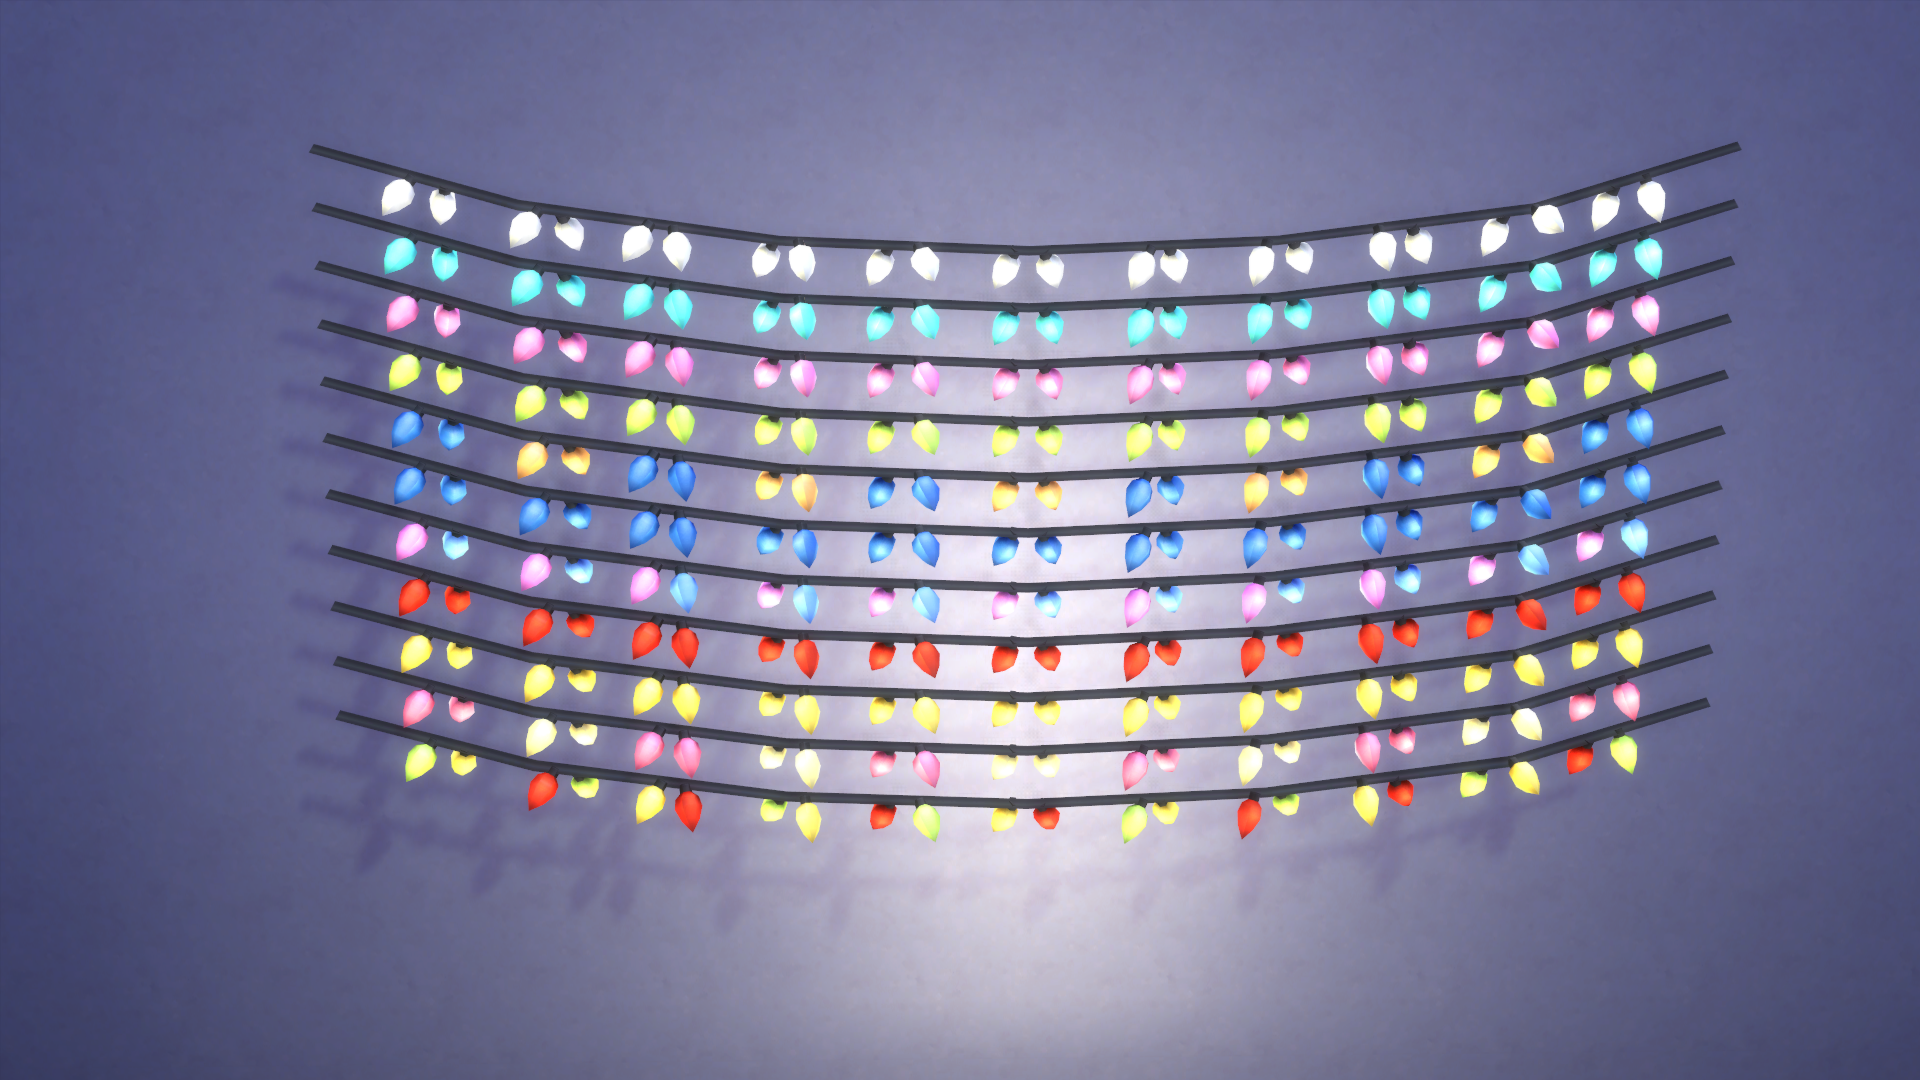 Hyret Tumult Inspiration Mod The Sims - String Lights Without Poles